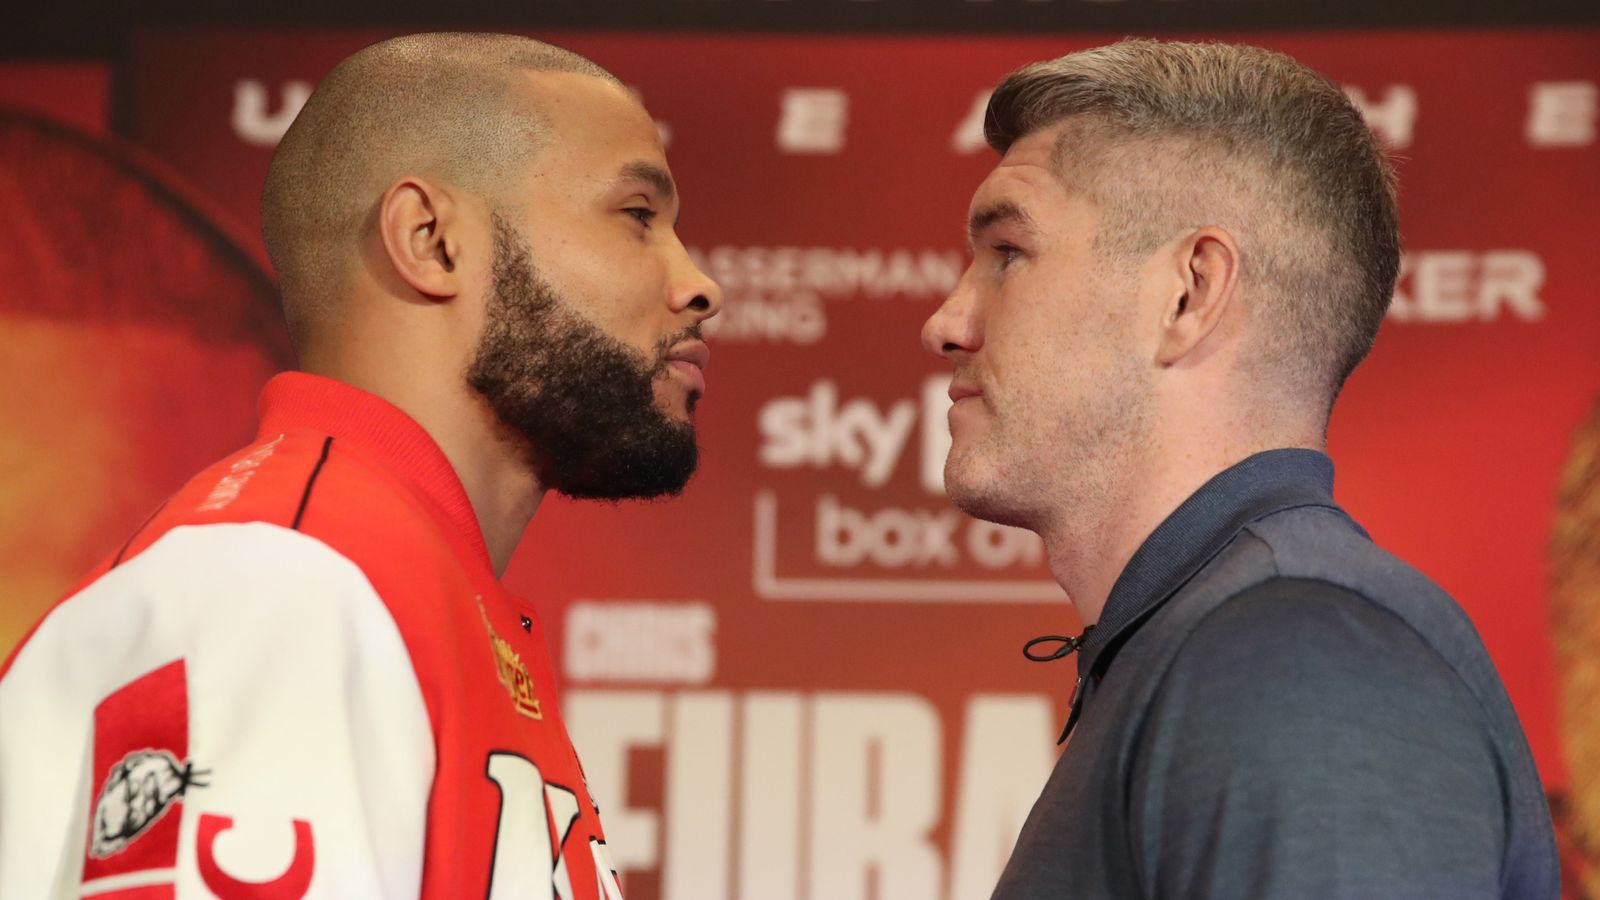 Chris Eubank Jr declares 'the bad guy is back' as he goes head to head with Liam  Smith at their first press conference | Boxing News | Sky Sports